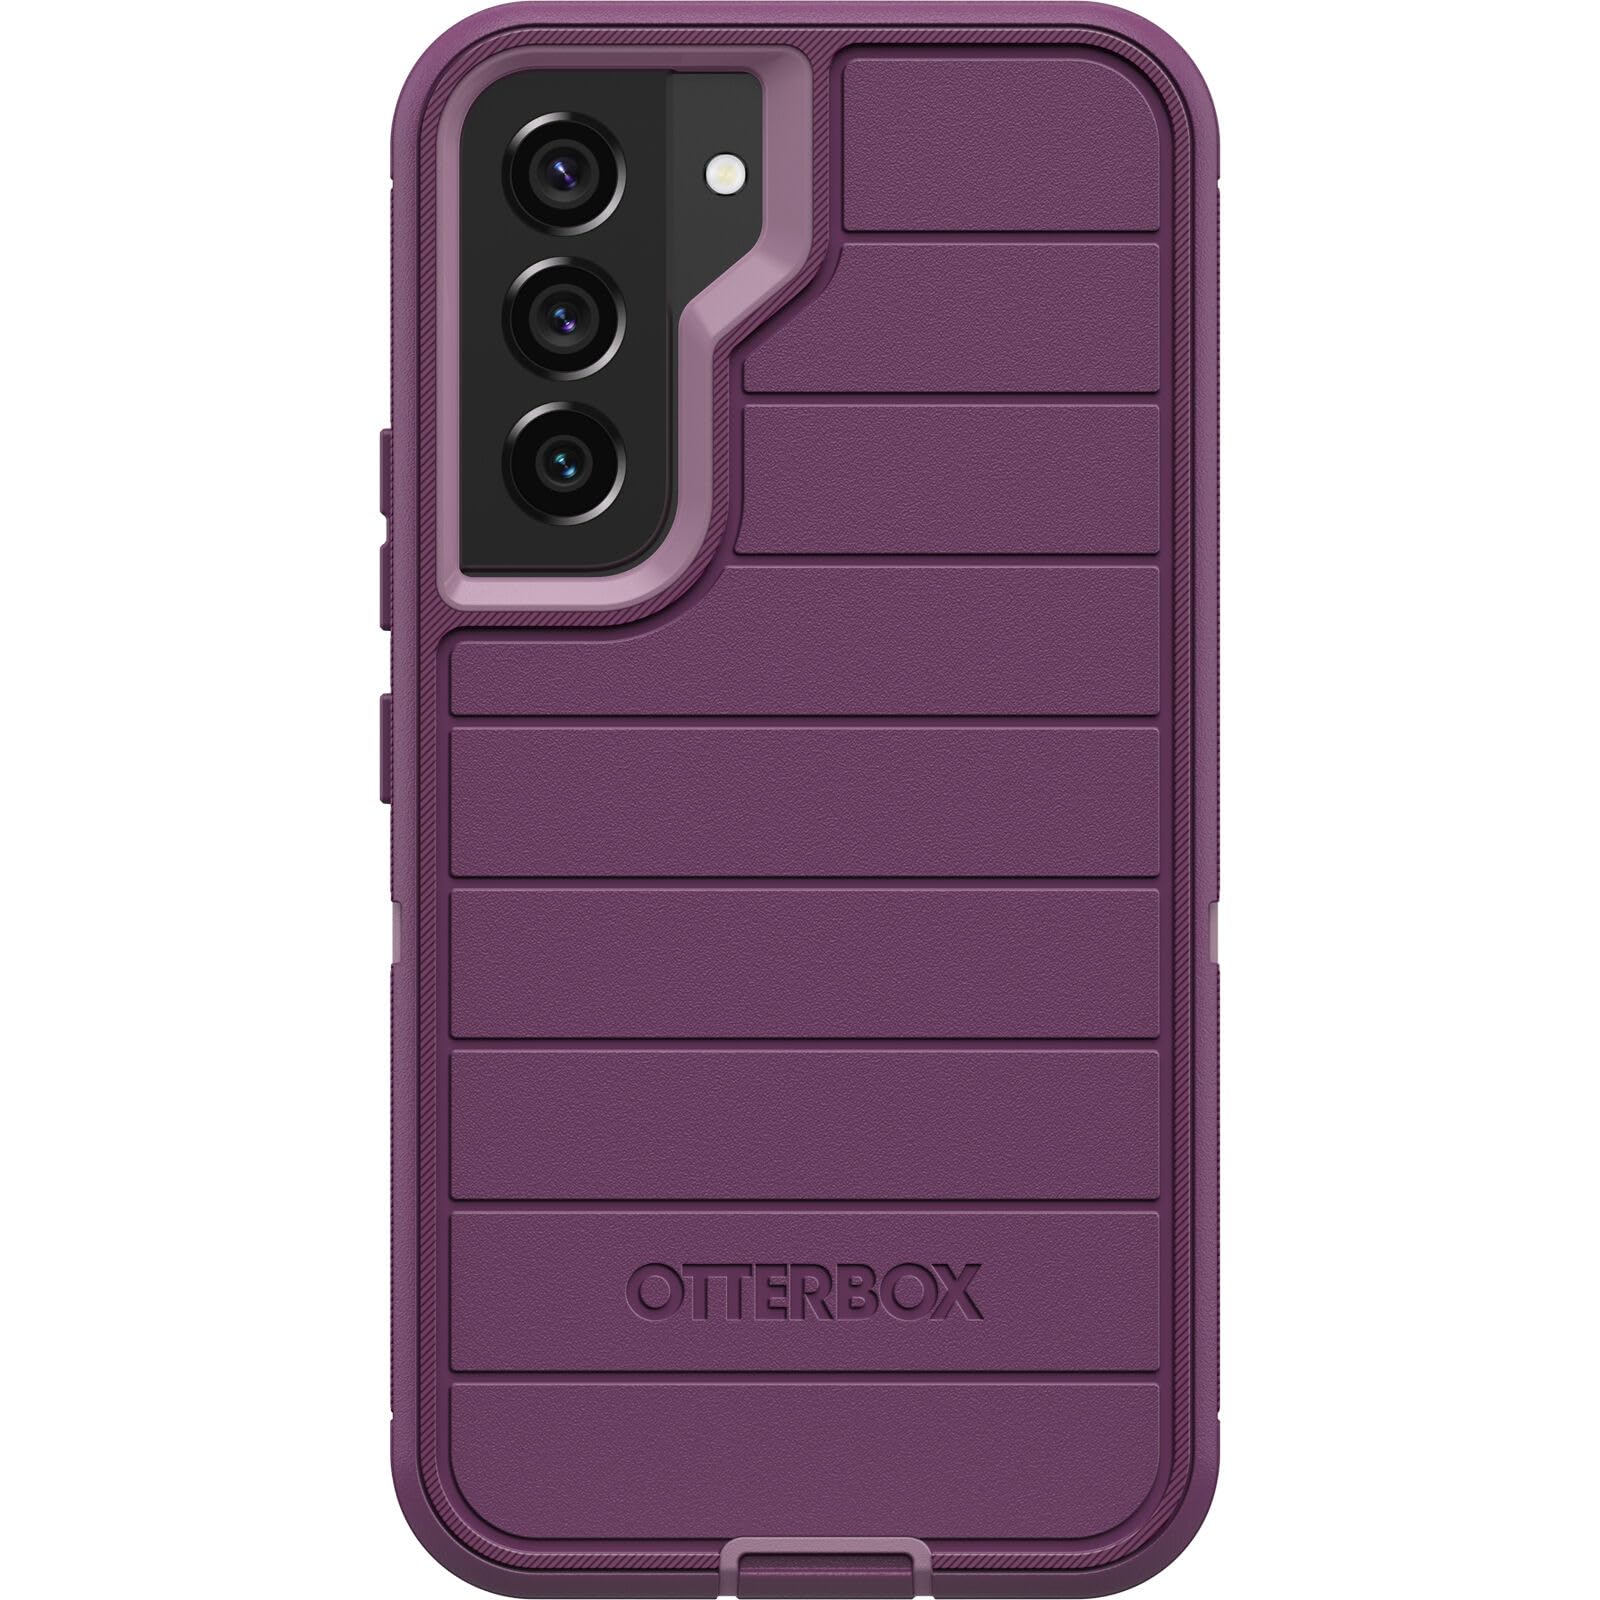 OtterBox Defender Series Case for Samsung Galaxy S22 (Only) - Case Only - Microbial Defense Protection - Non-Retail Packaging - Happy Purple